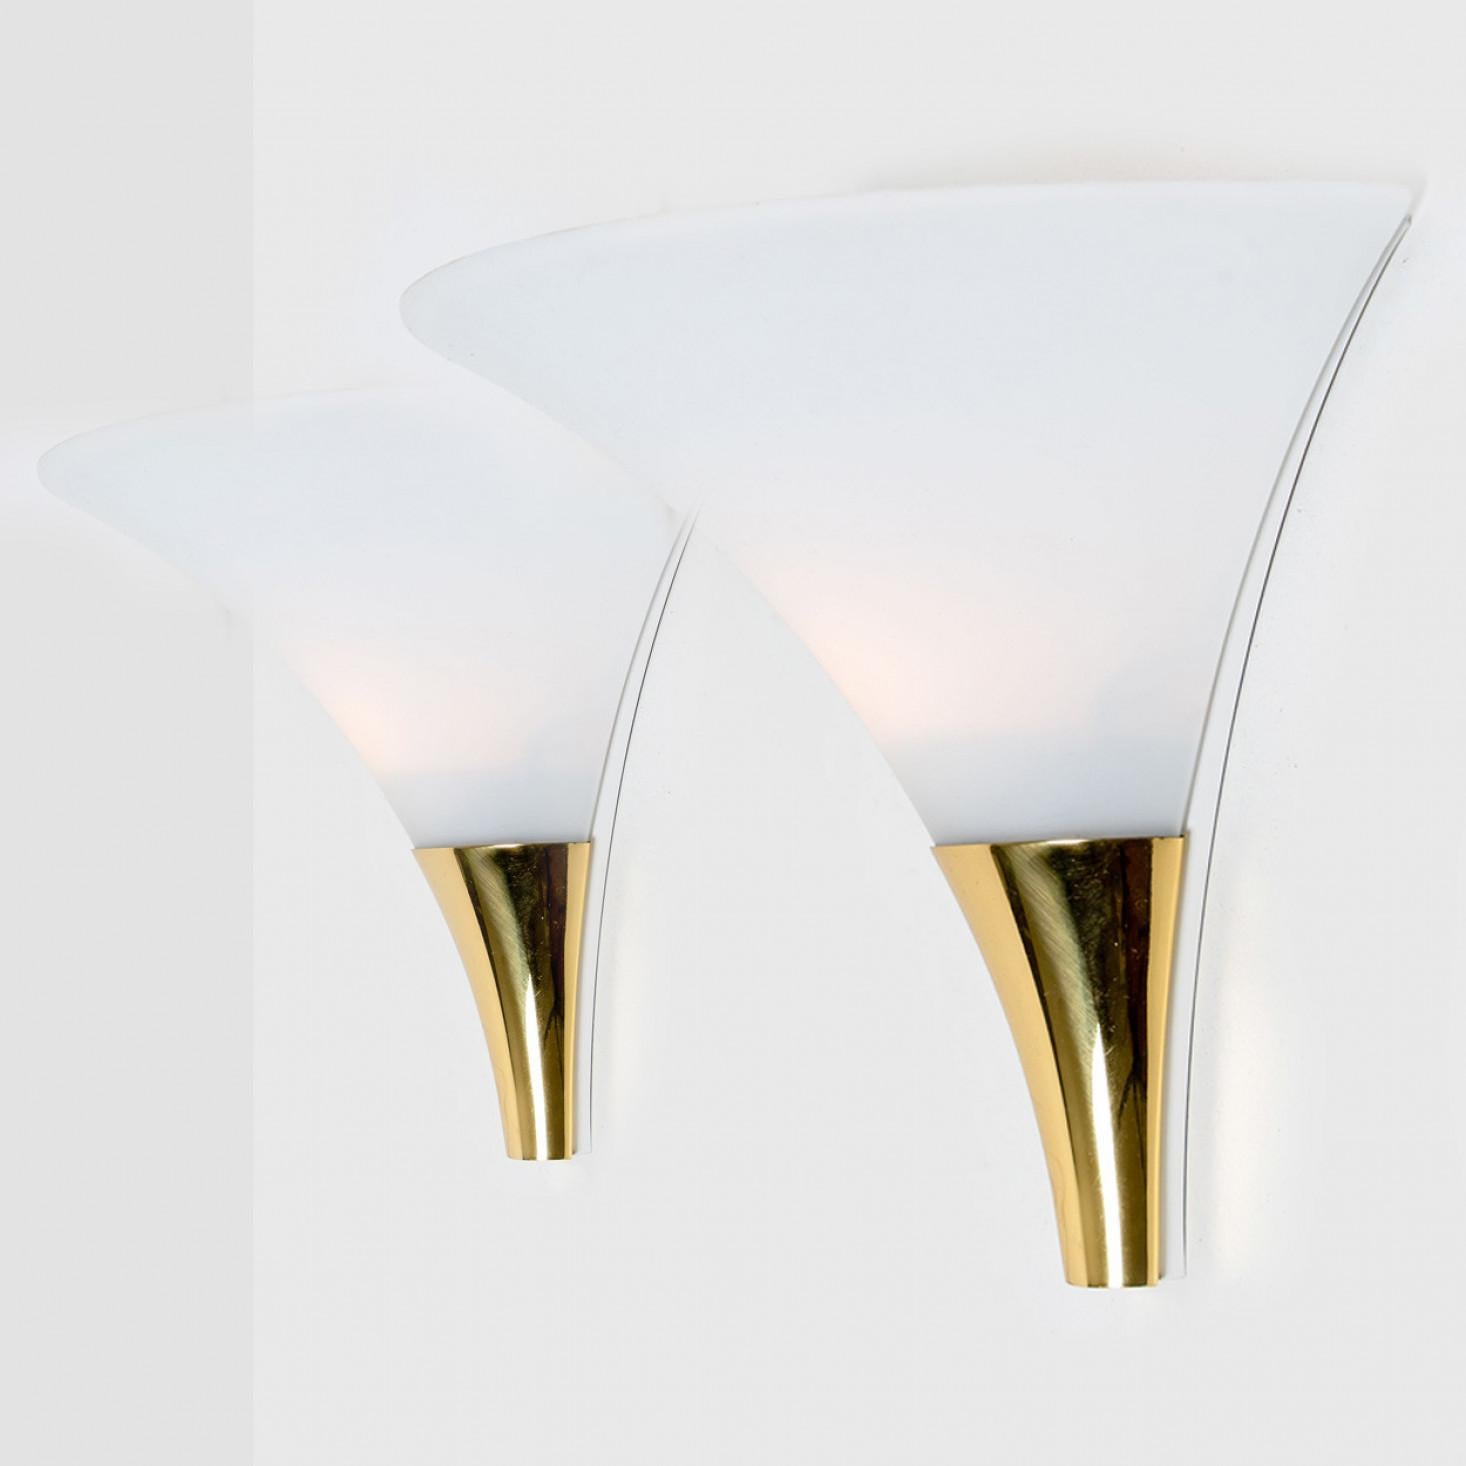 1 of the 16 funnel shaped wall lamps by Glashütte Limburg made in Germany, Europe in the 1970s.
They have a beautiful cone shape and are made of beautiful white, opaque glass and solid brass.
This wall light gives a warm light that suits any